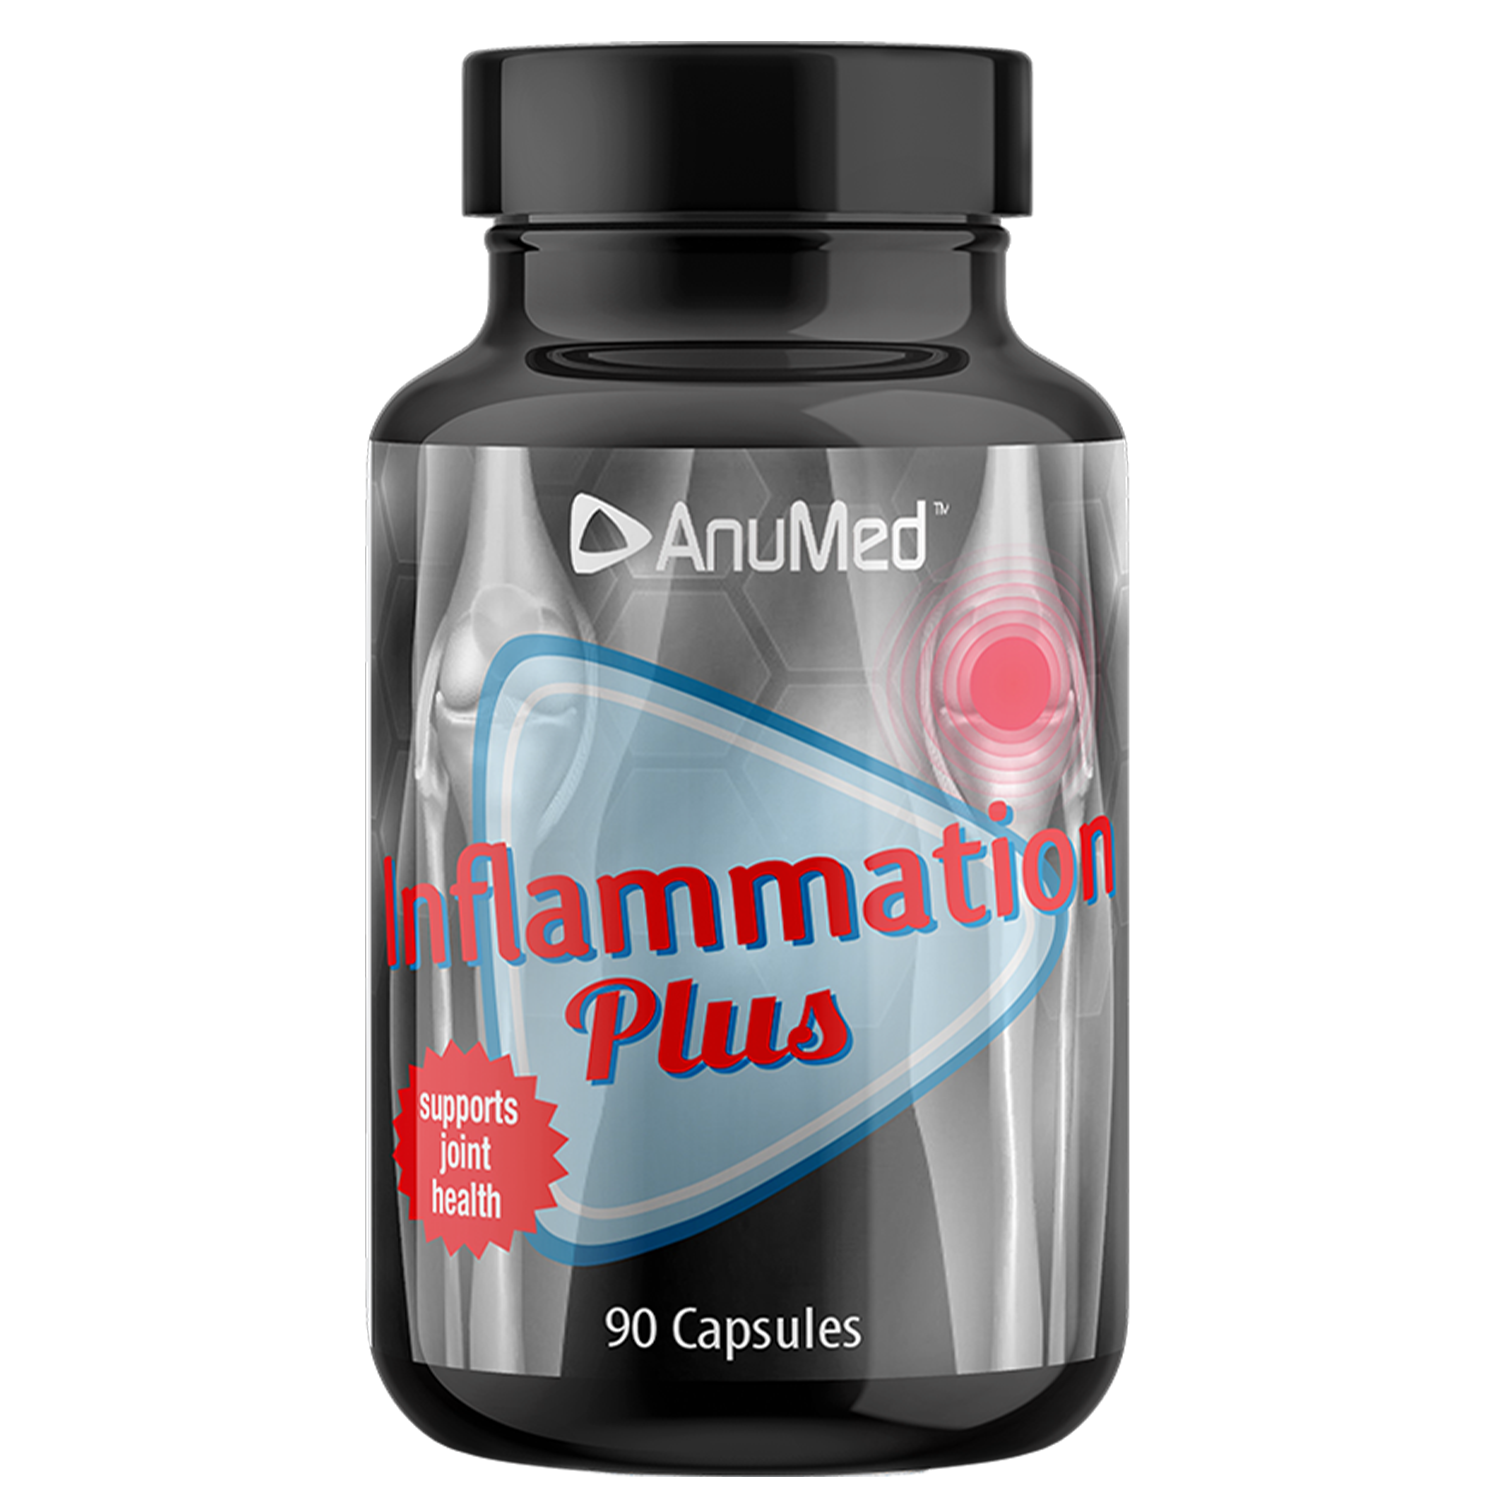 Inflammation Plus with Glucosamine and Hyaluronic Acid for Natural Anti-Inflammatory, Joint, Bones and Arthritis Pain Relief.